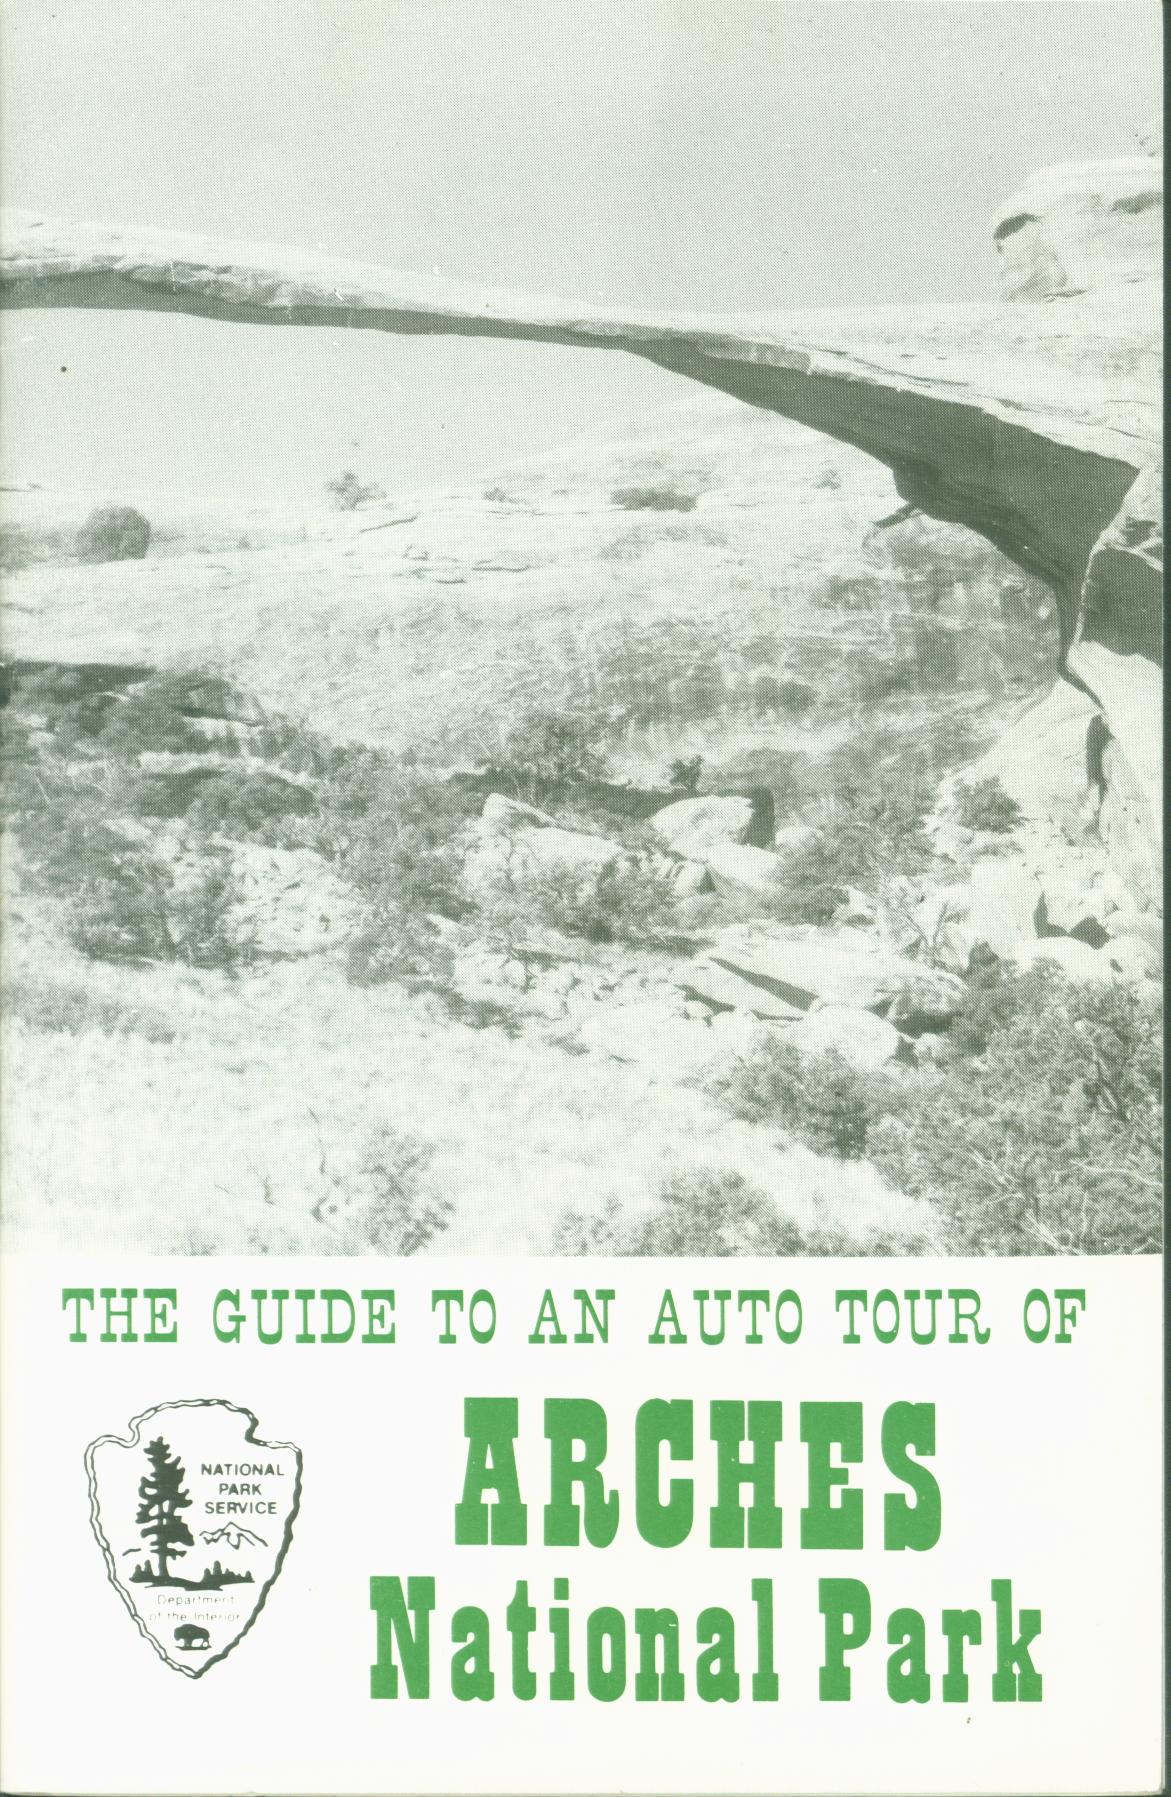 ARCHES NATIONAL PARK: guide to an auto tour.